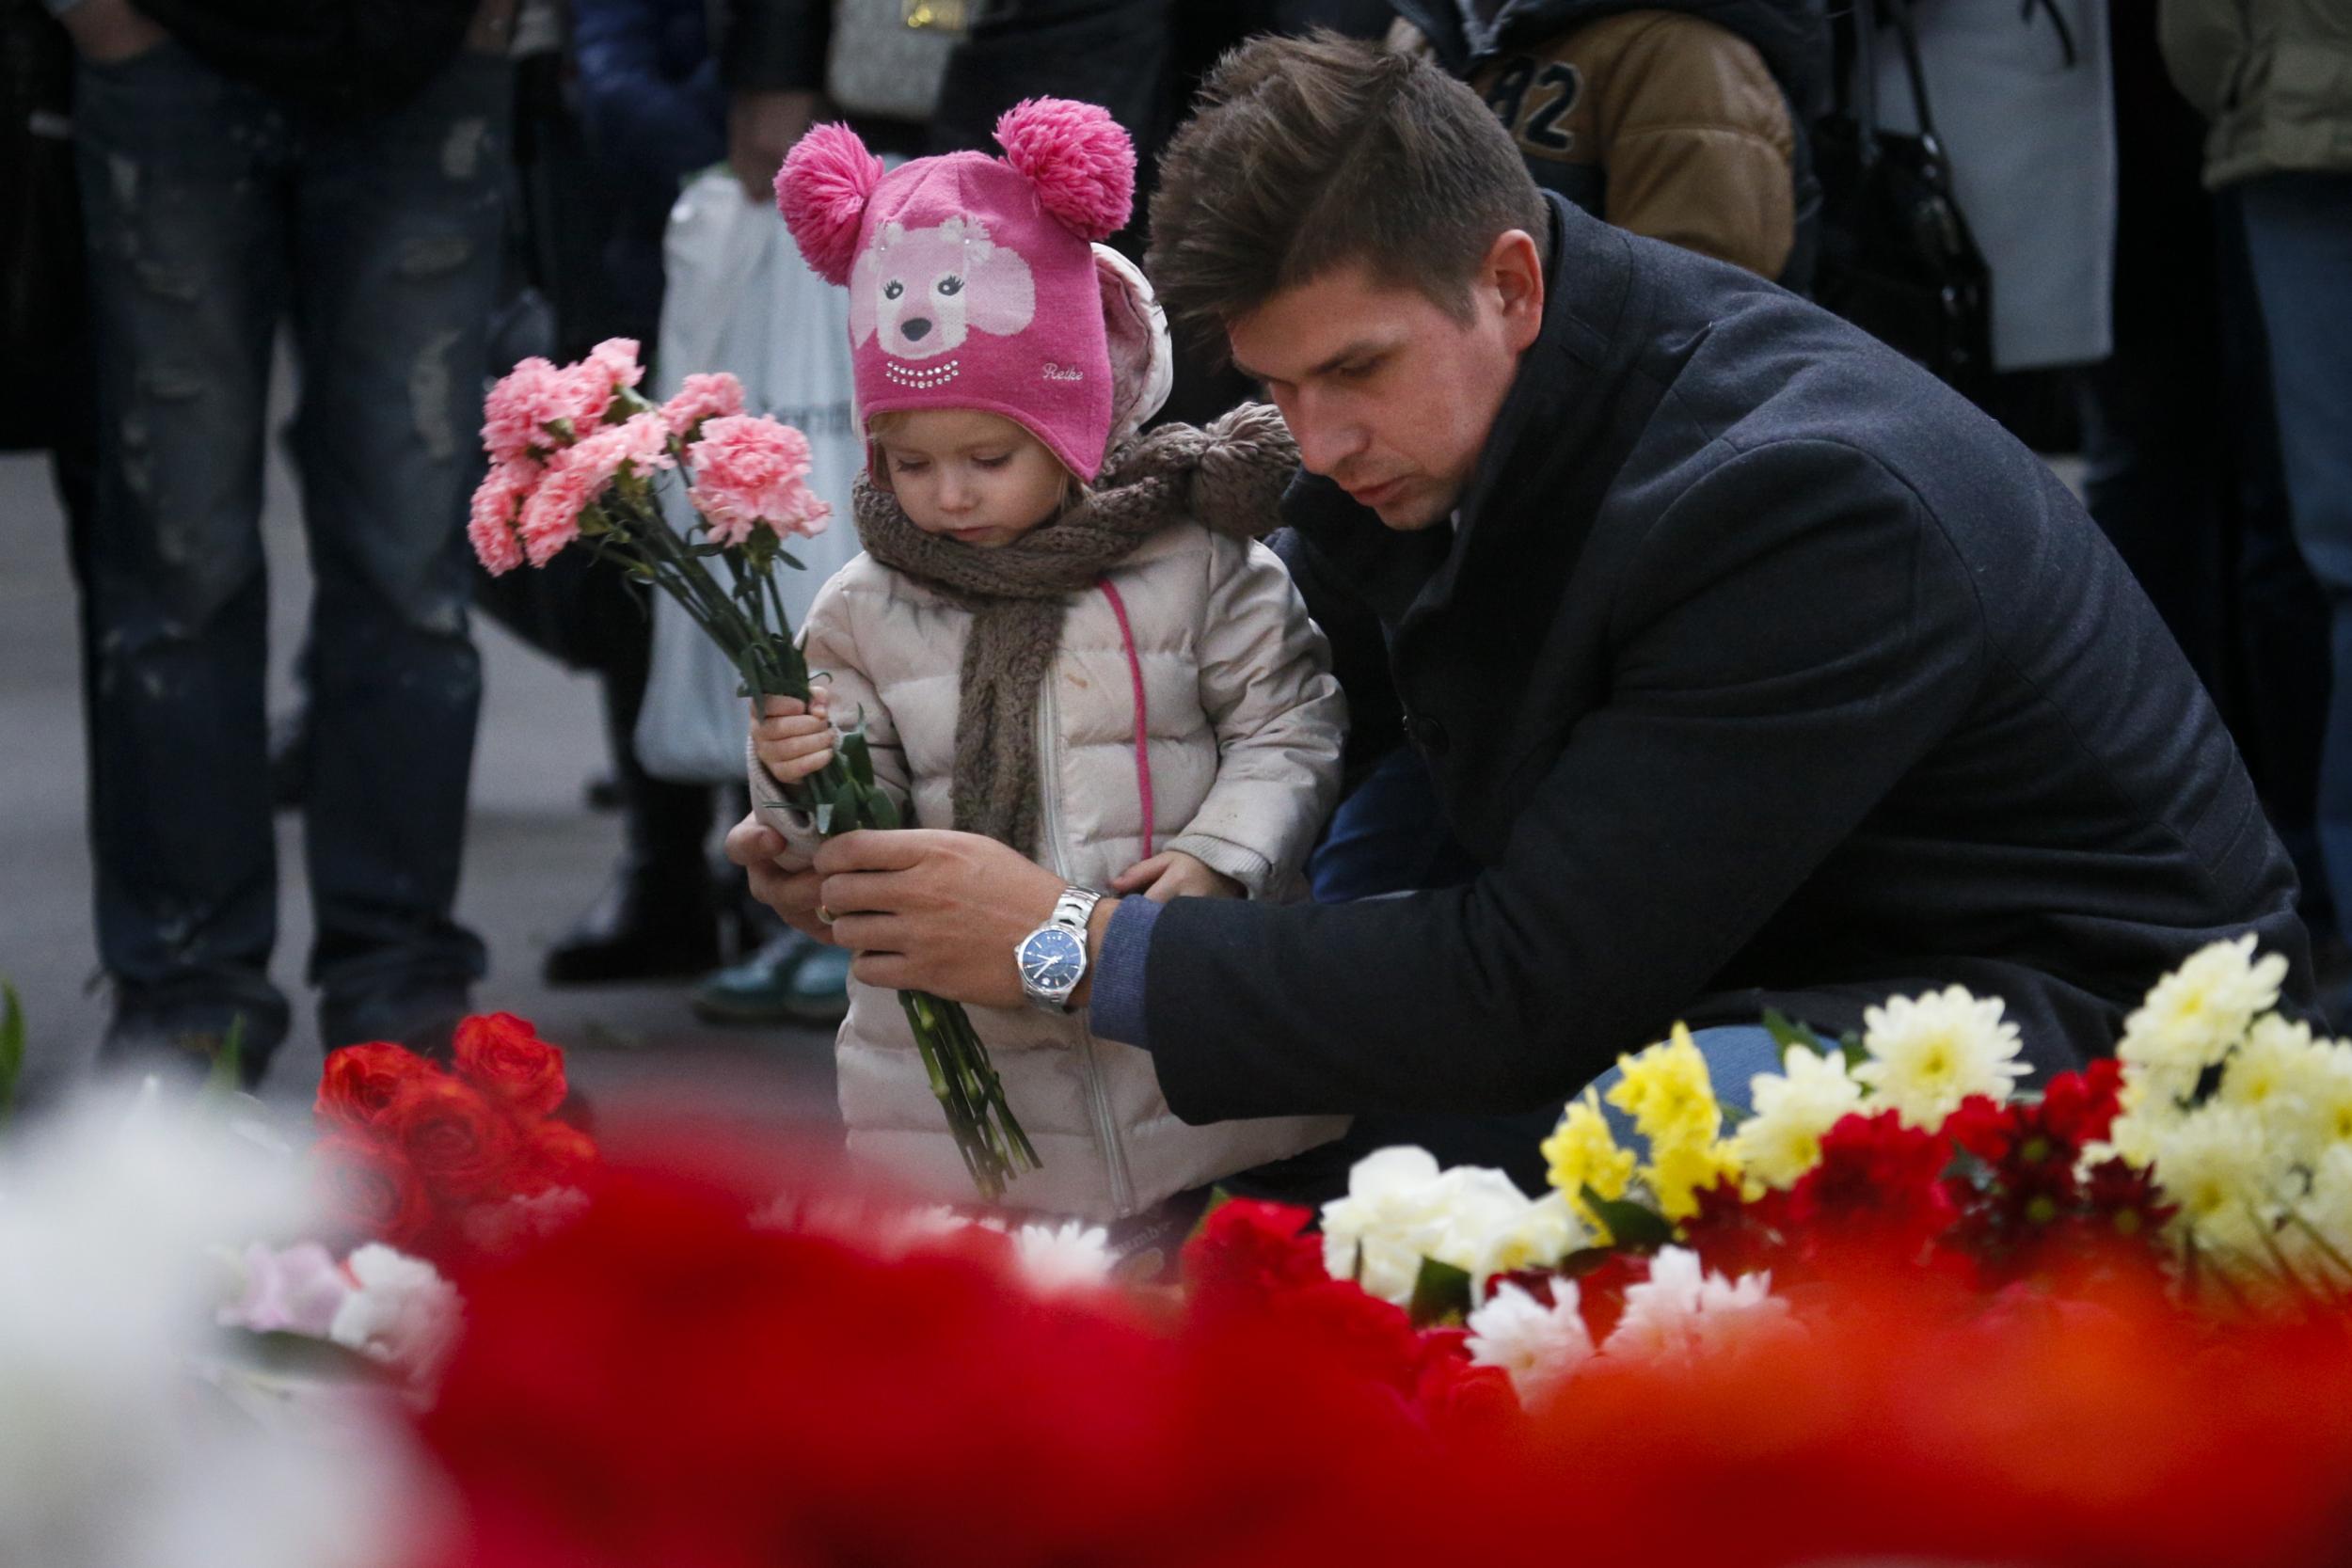 Russia is observing a day of mourning